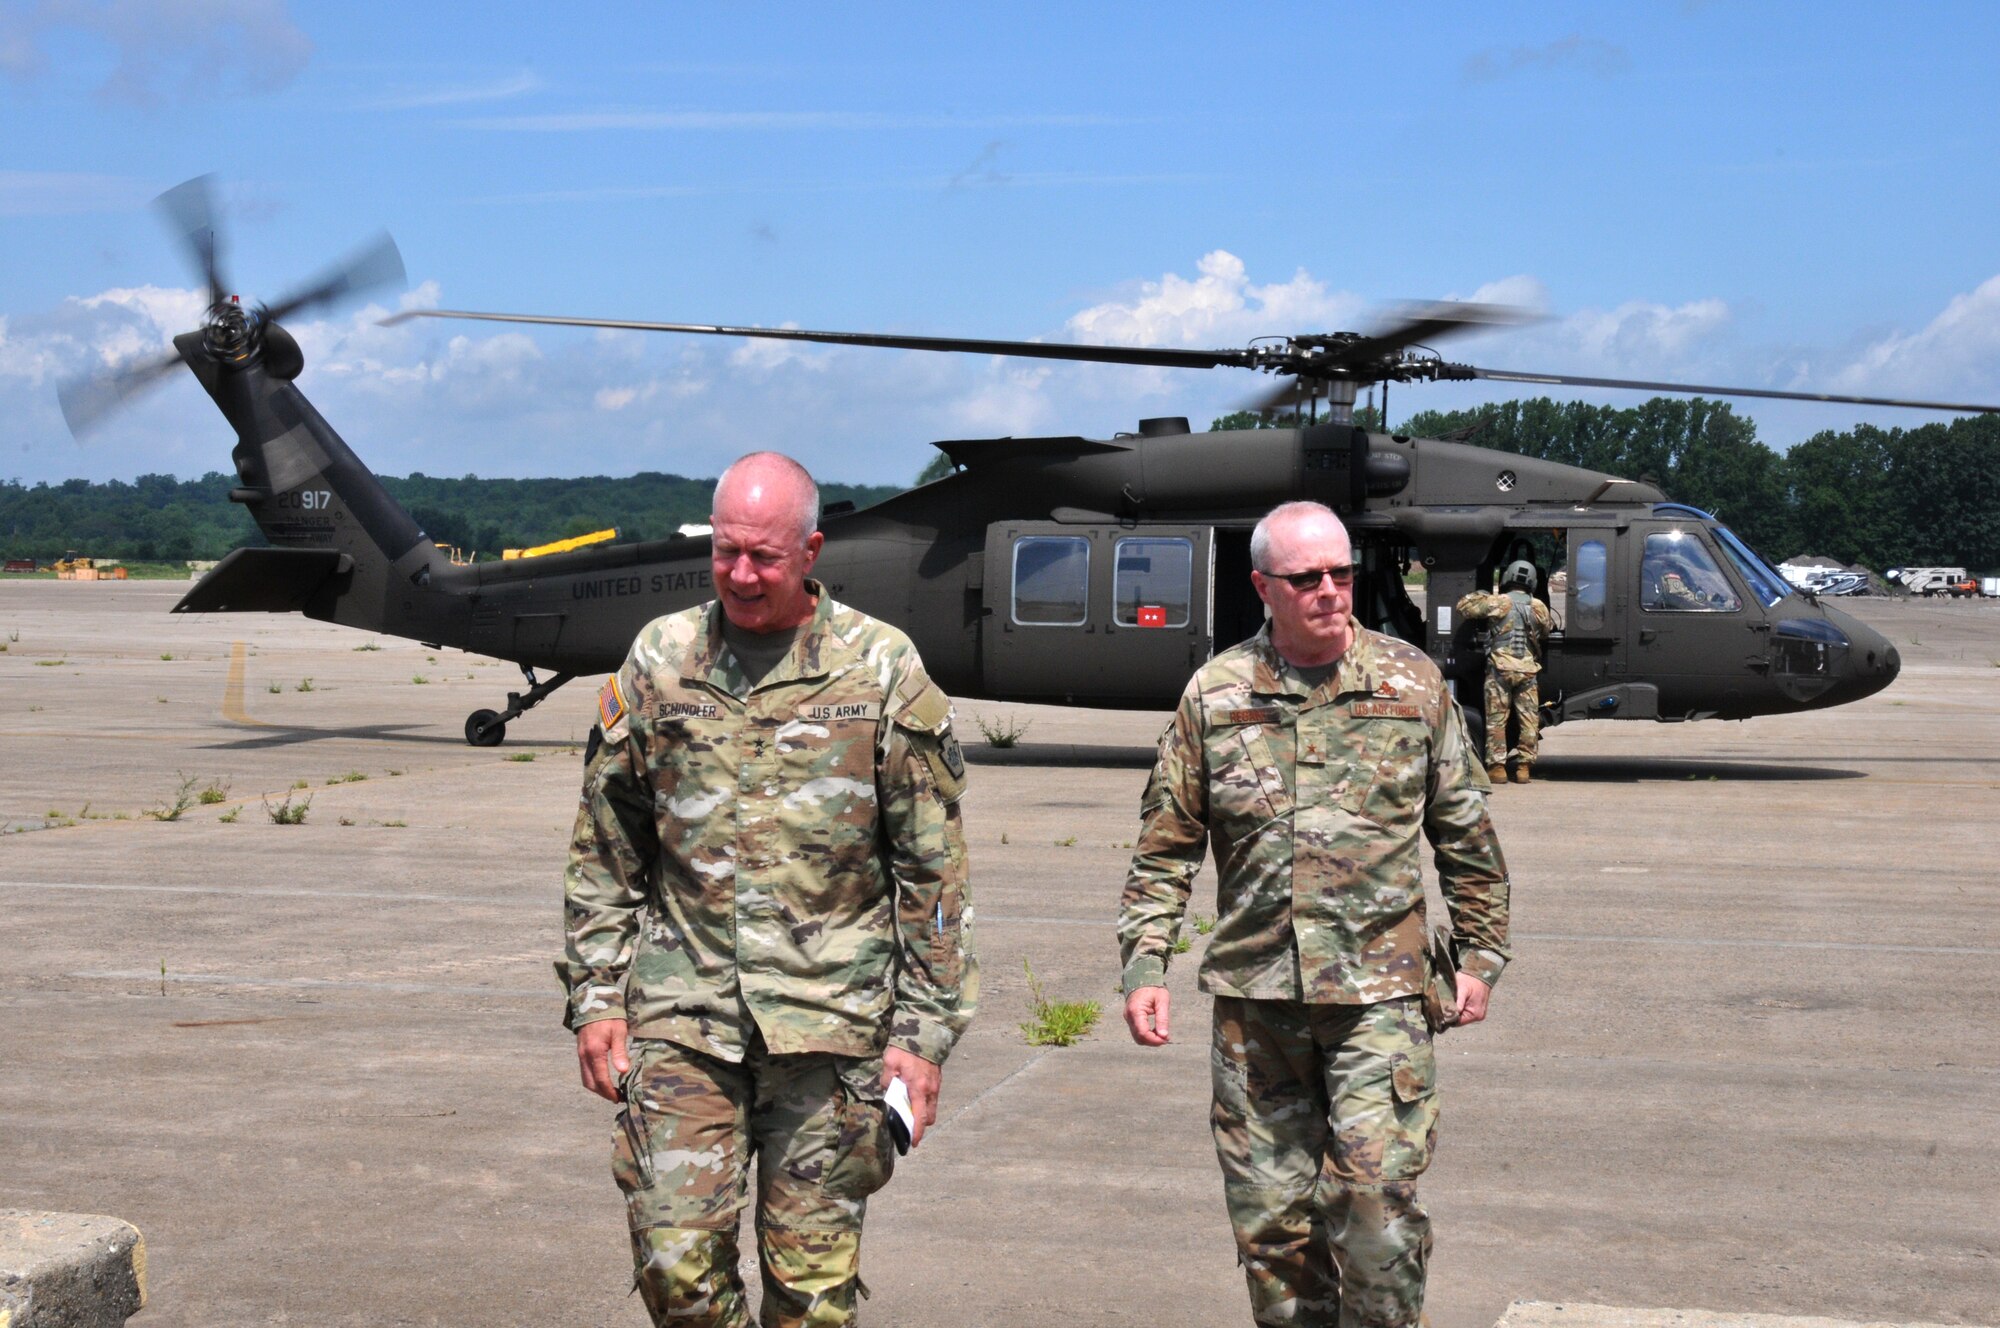 Two men in OCP Air Force uniform deboarding an helicopter.